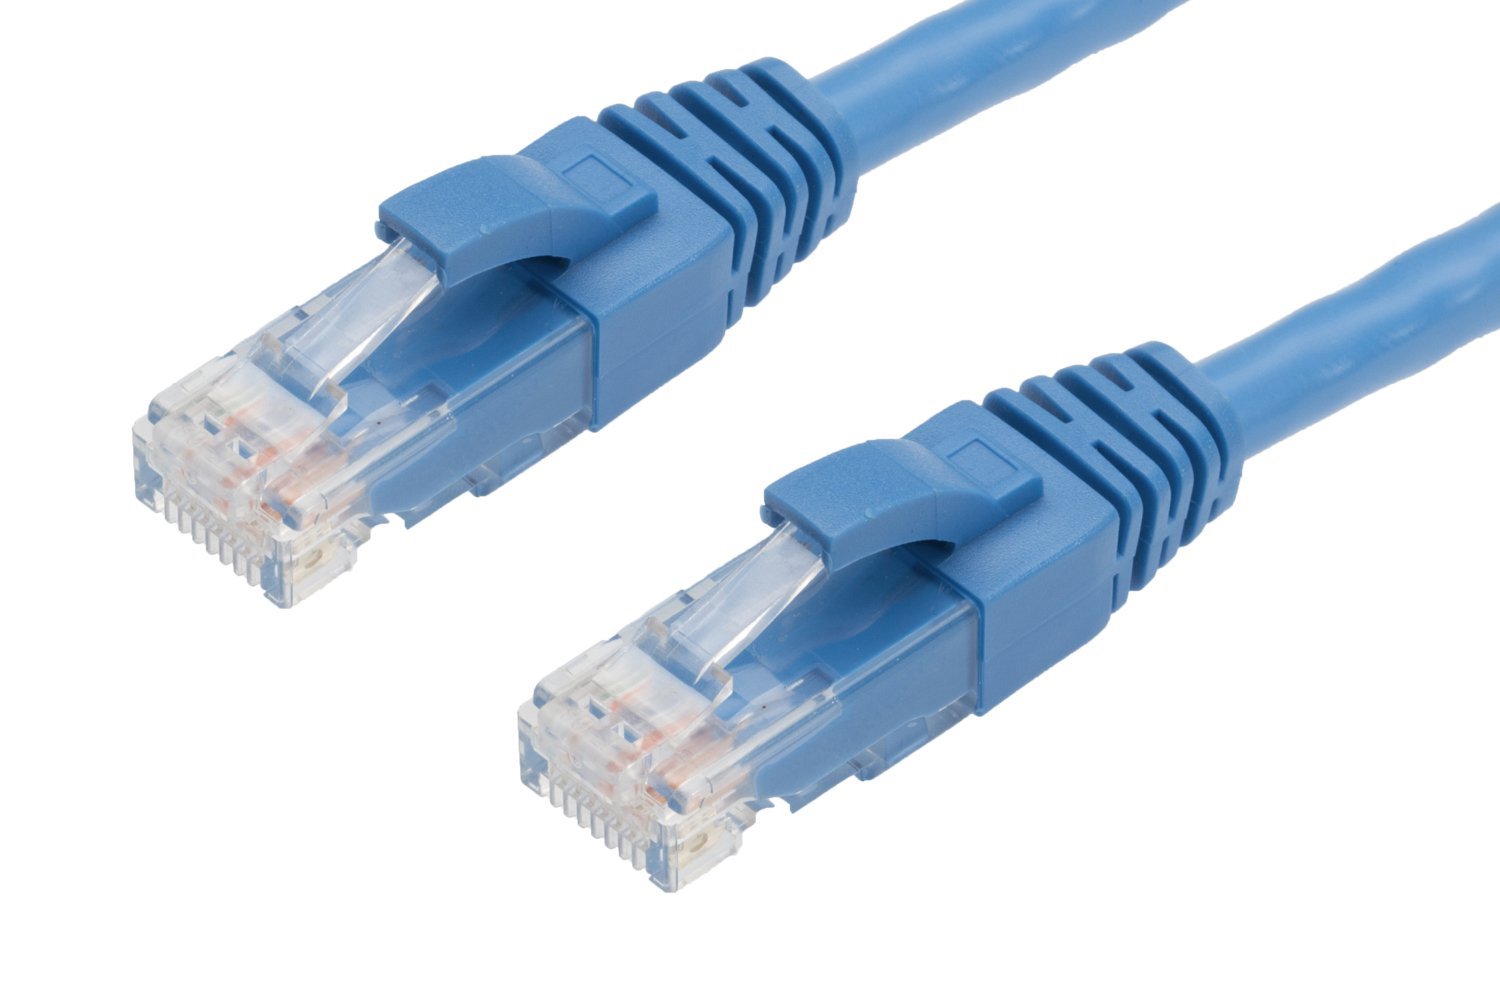 4Cabling 0.5M Cat 5E Ethernet Network Cable: Blue